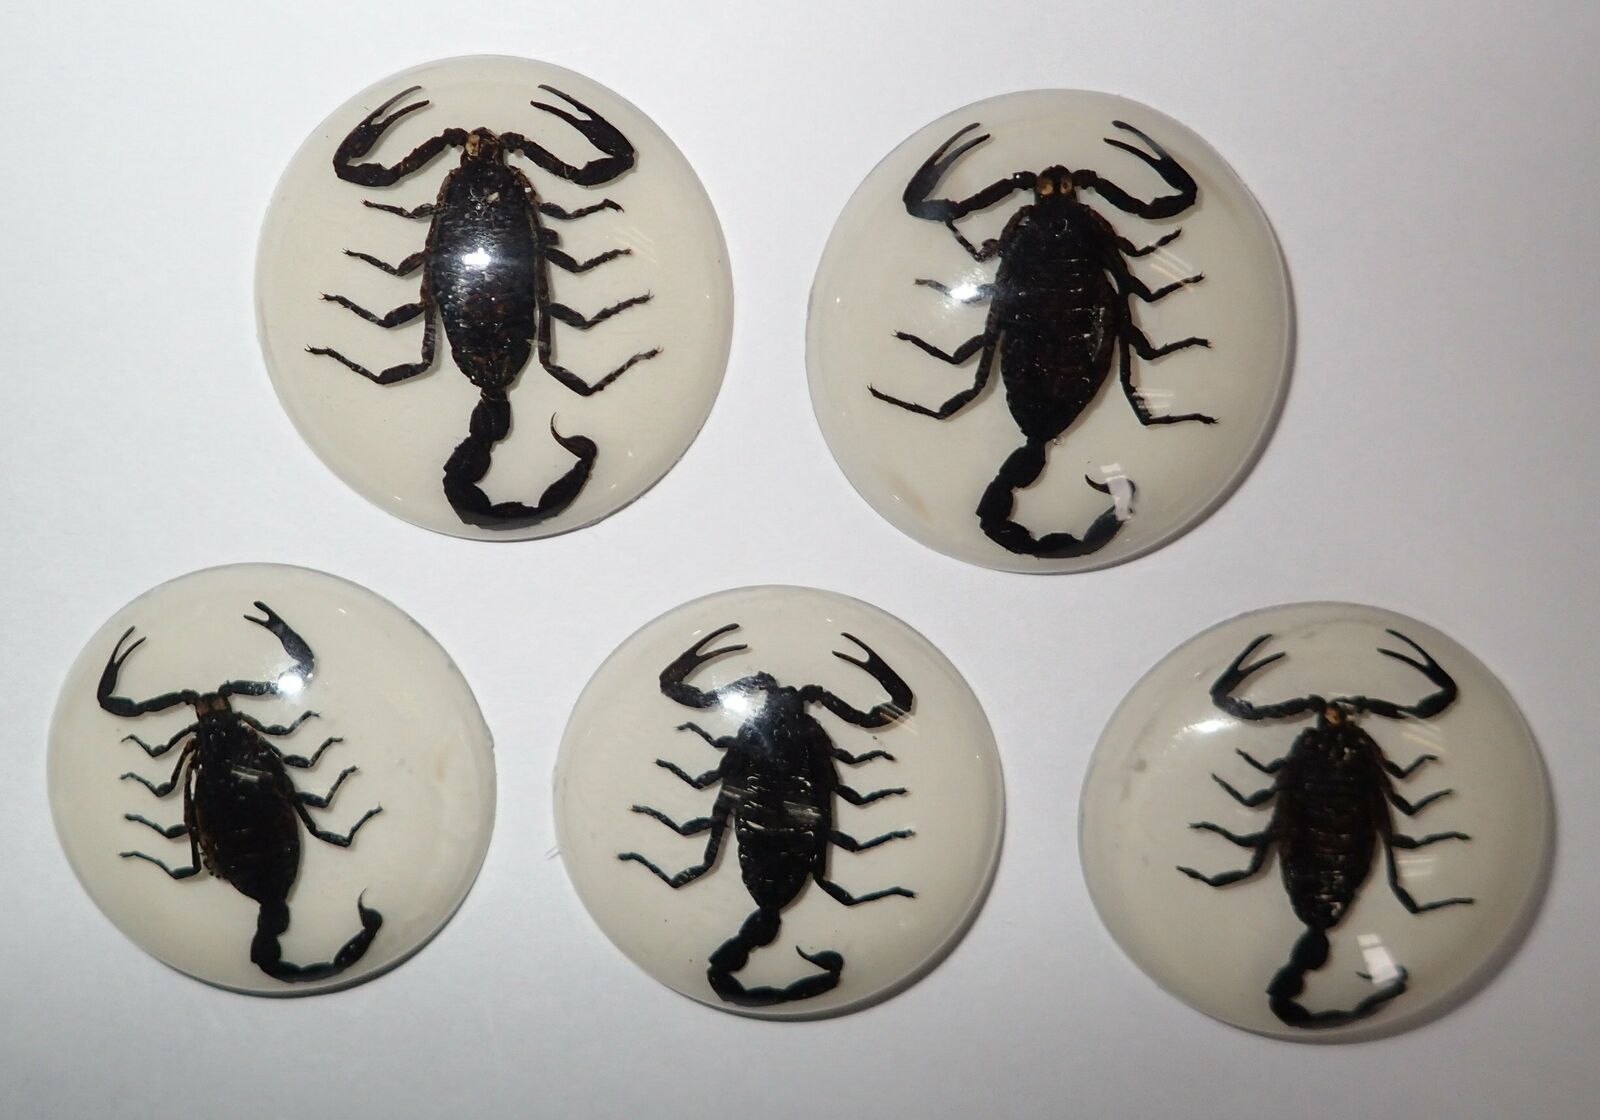 Insect Cabochon Black Scorpion 35 mm Round on White Bottom 100 pieces Lot